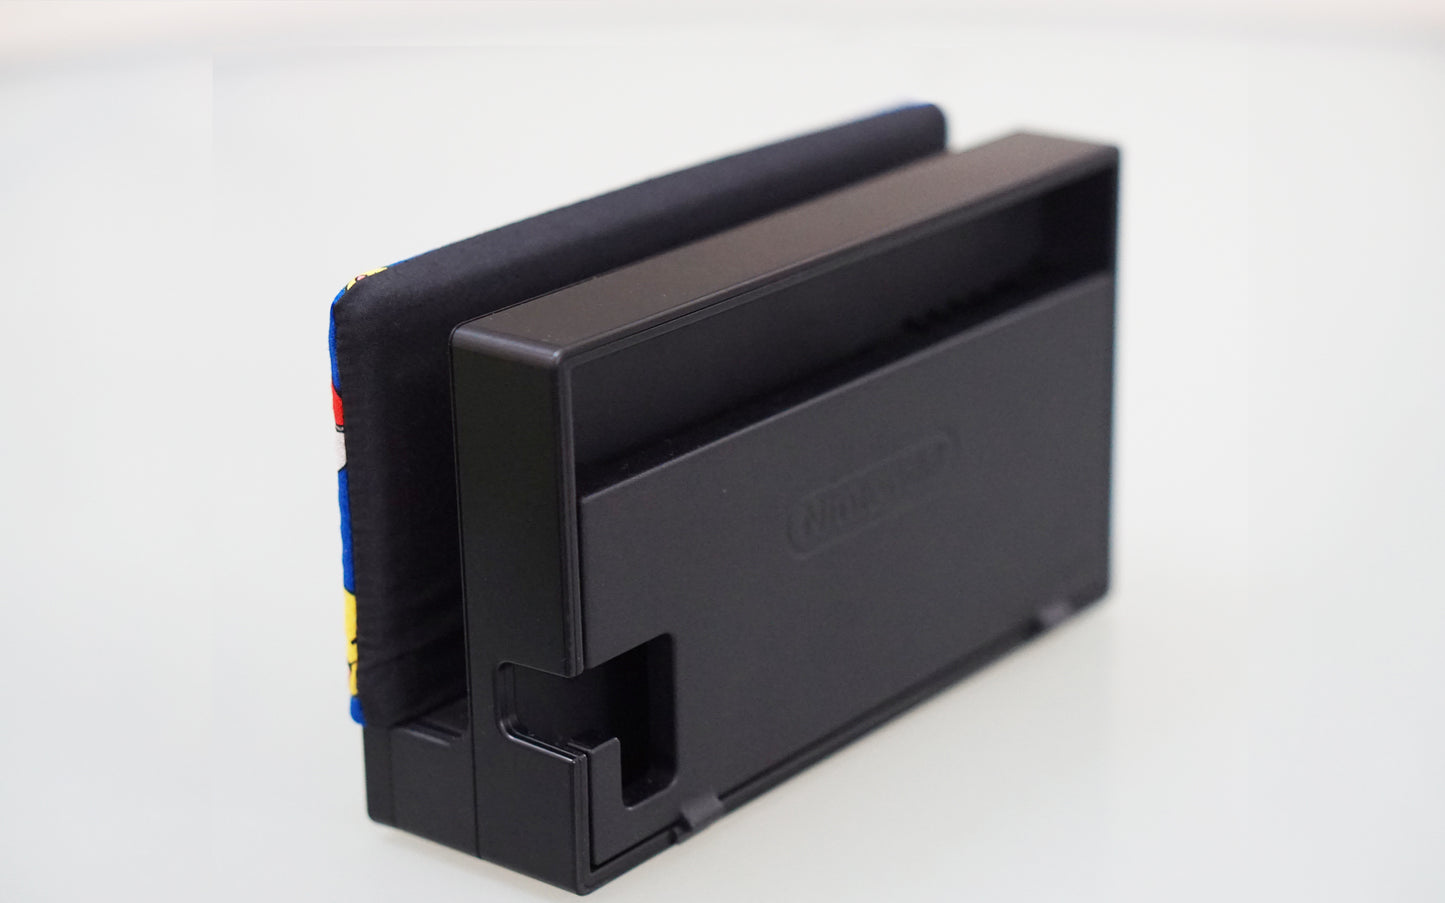 Padded Dock Cover Made For Nintendo Switch